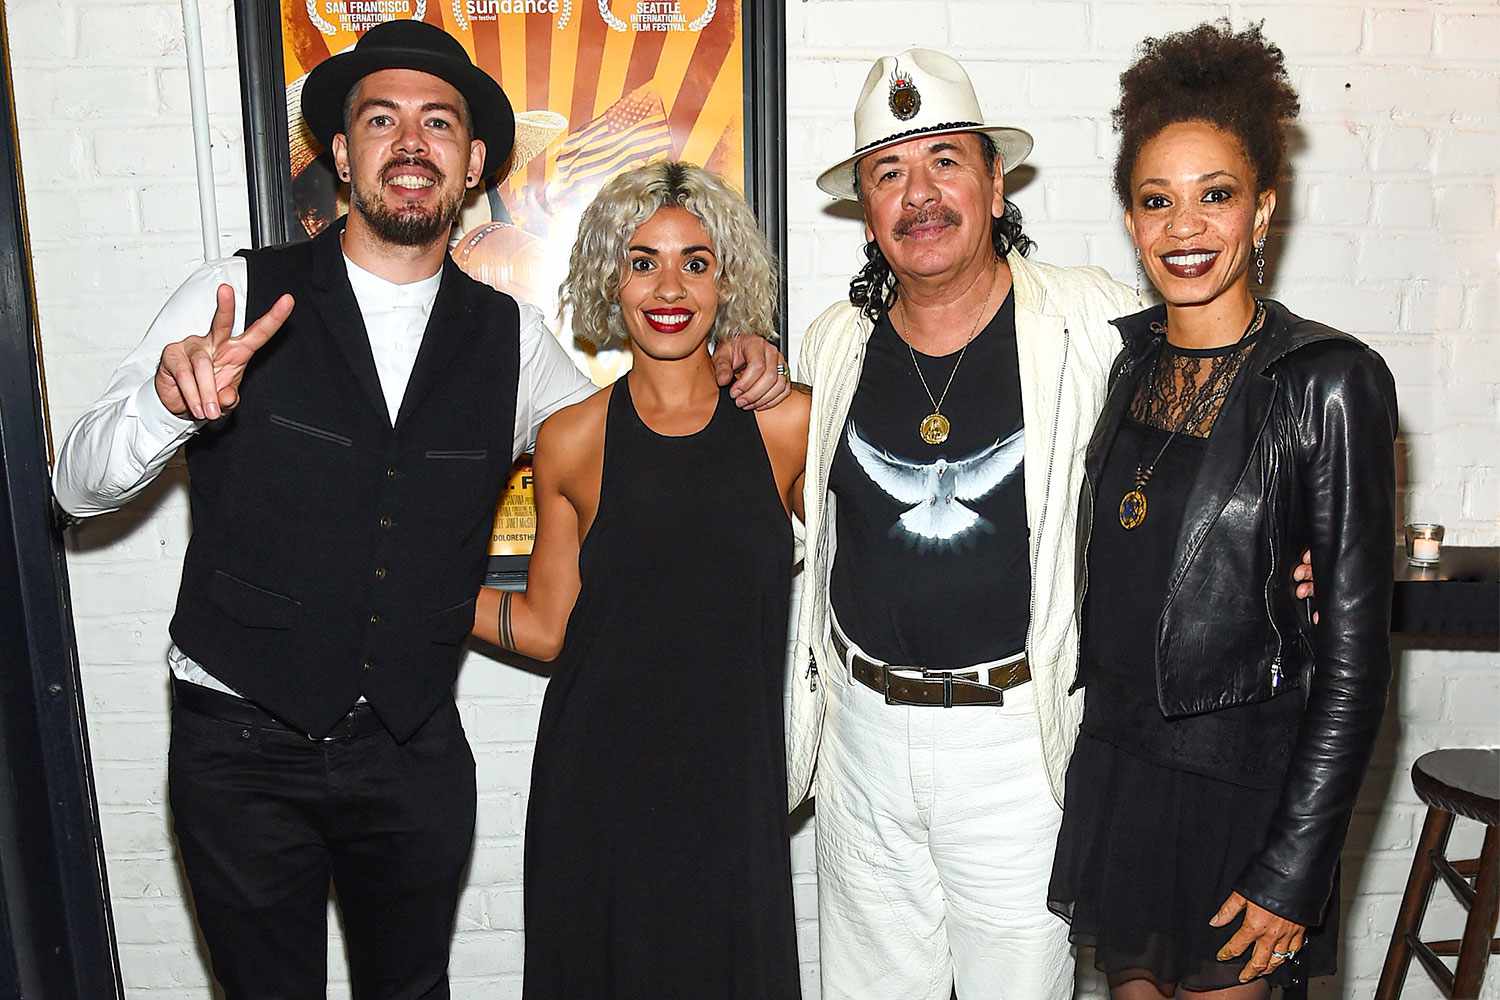 NEW YORK, NY - AUGUST 21: Executive Producer Carlos Santana with wife Cindy Blackman, daughter Stella Santana and her husband attend the "Dolores" New York Premiere at The Metrograph on August 21, 2017 in New York City. (Photo by Jamie McCarthy/Getty Images)